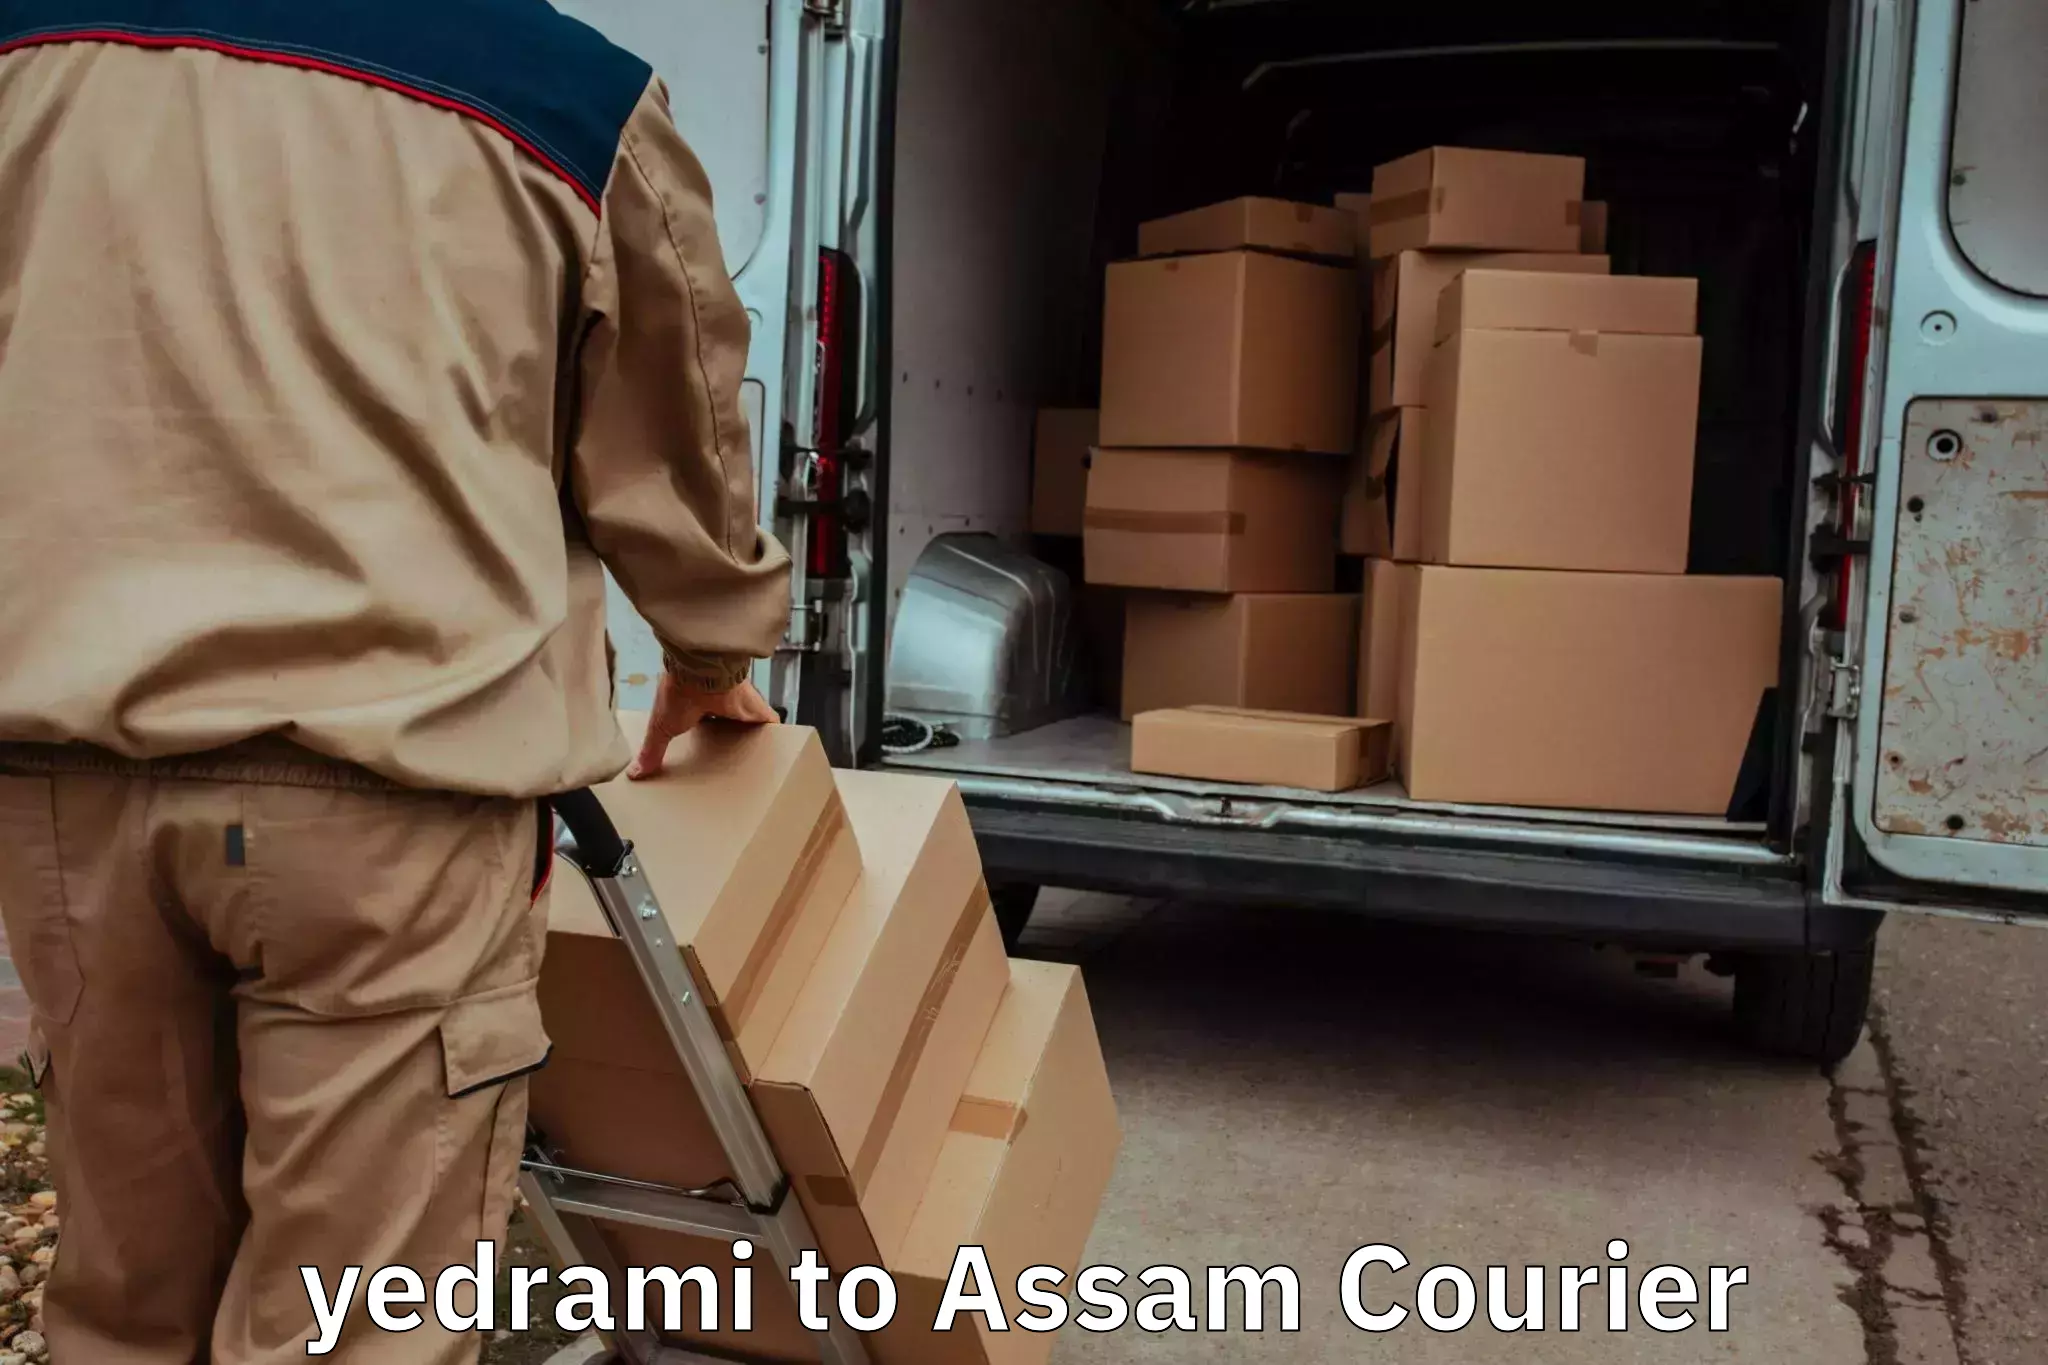 Furniture moving service yedrami to Assam